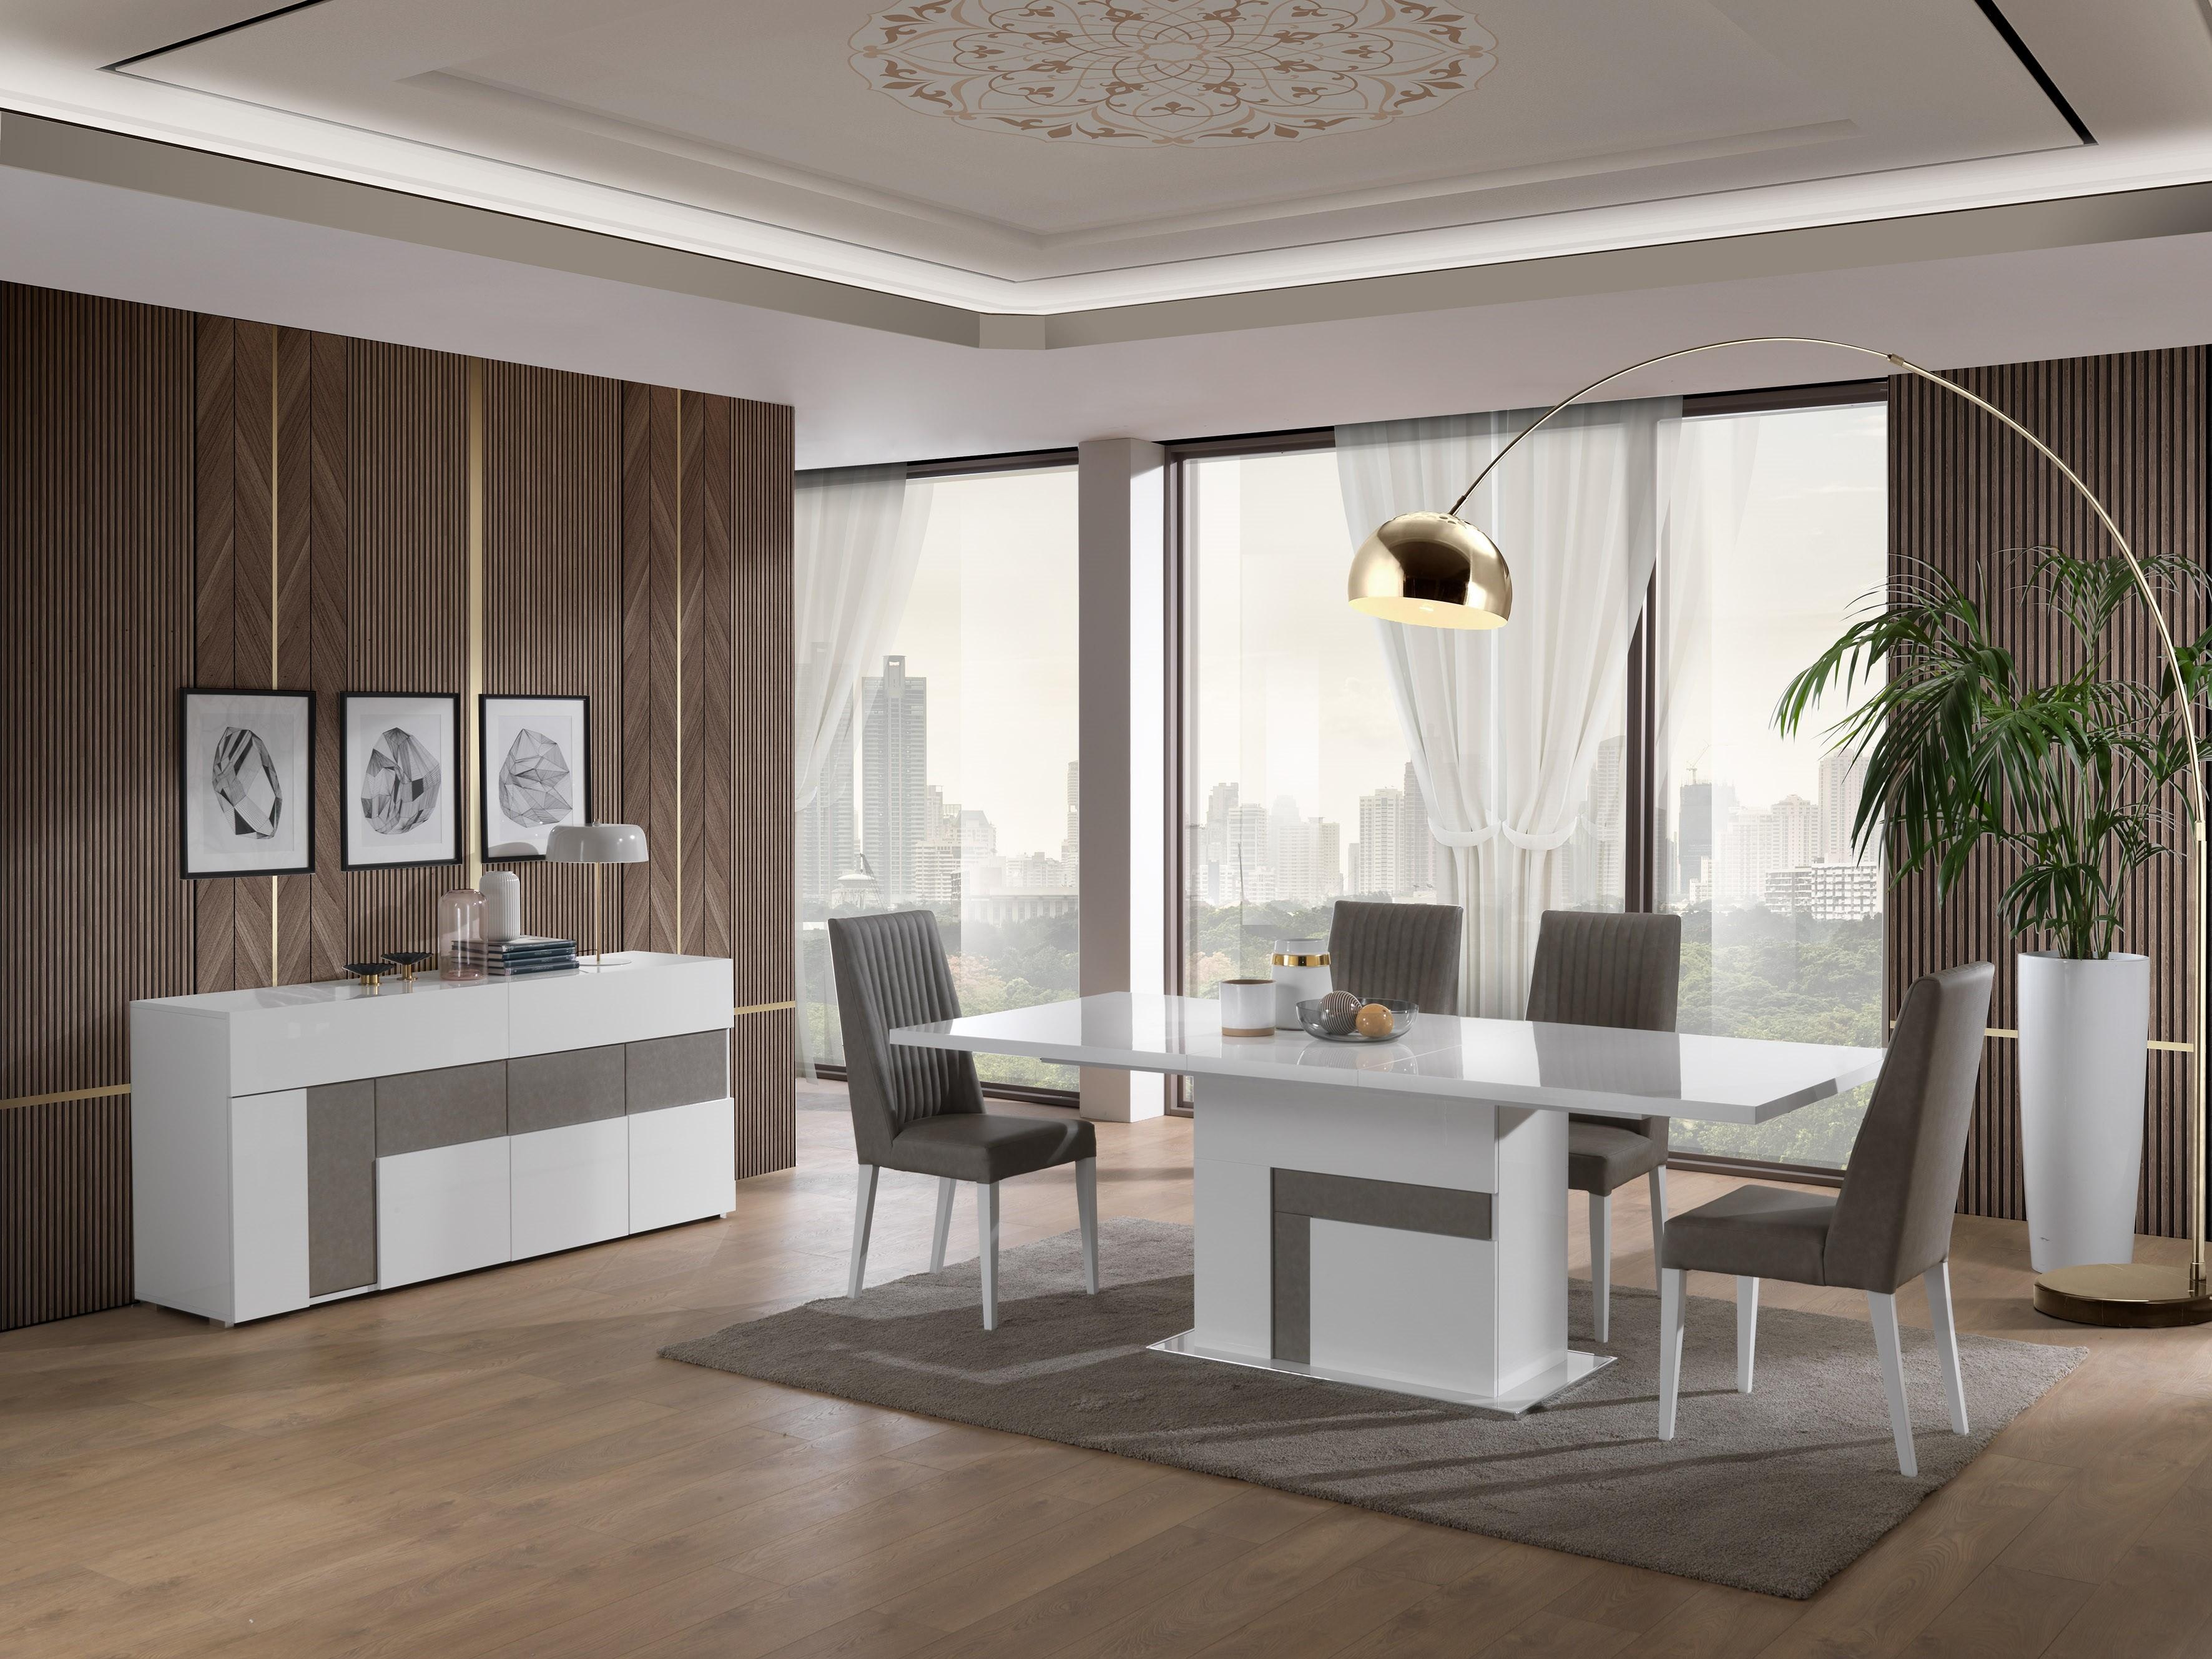 Contemporary, Modern Dining Set Luxuria SKU18122-6PC in White, Gray Eco Leather